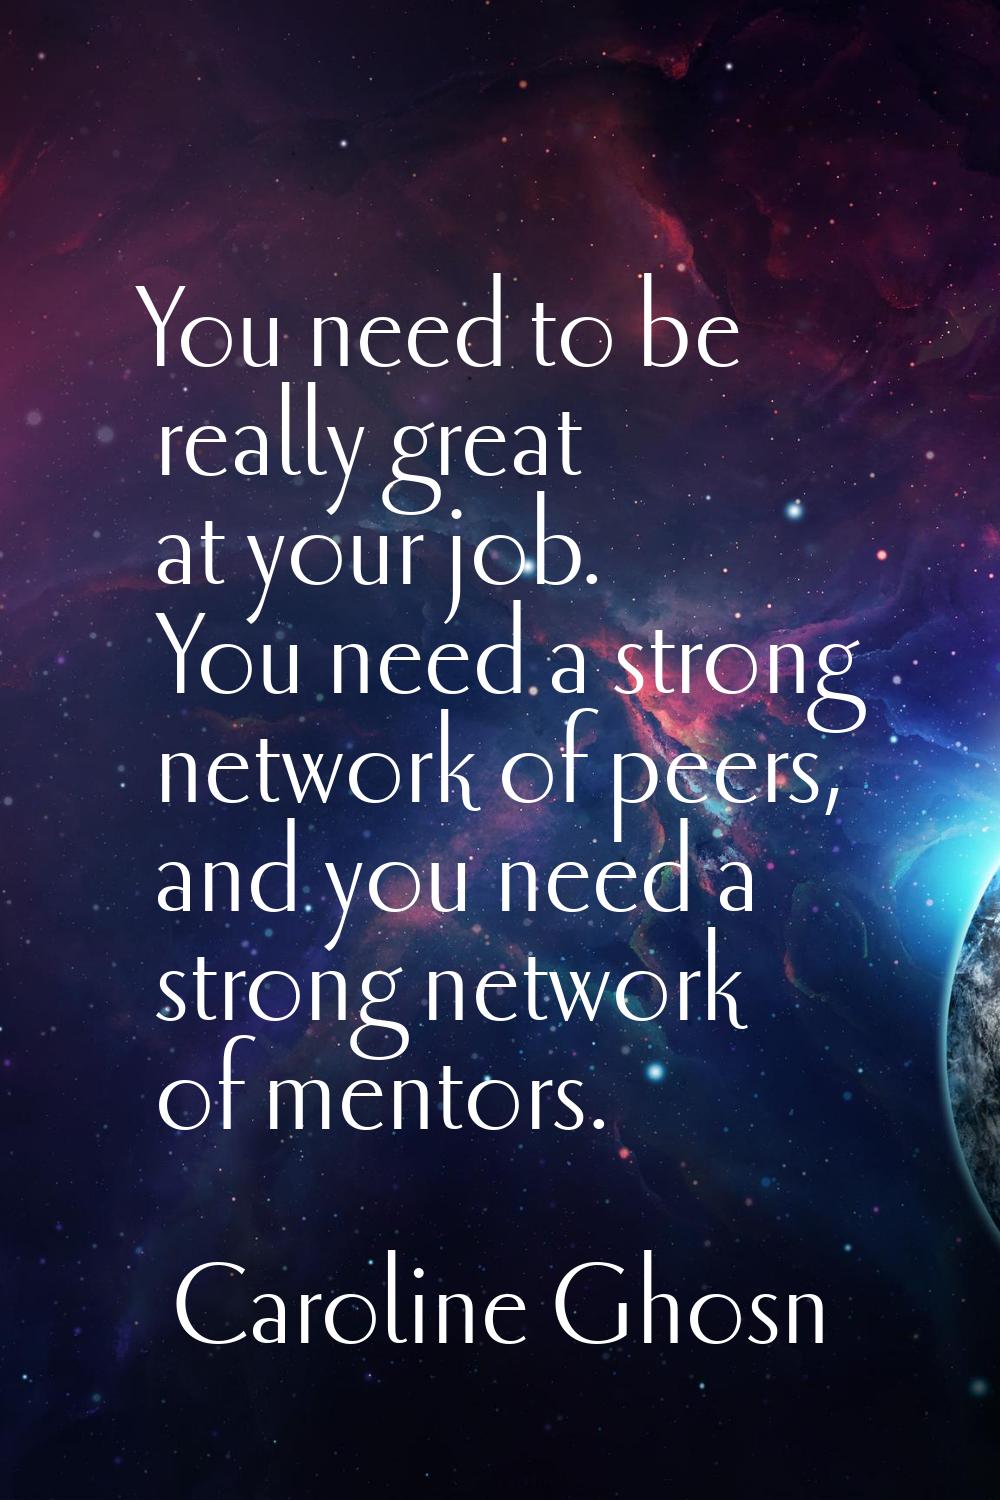 You need to be really great at your job. You need a strong network of peers, and you need a strong 